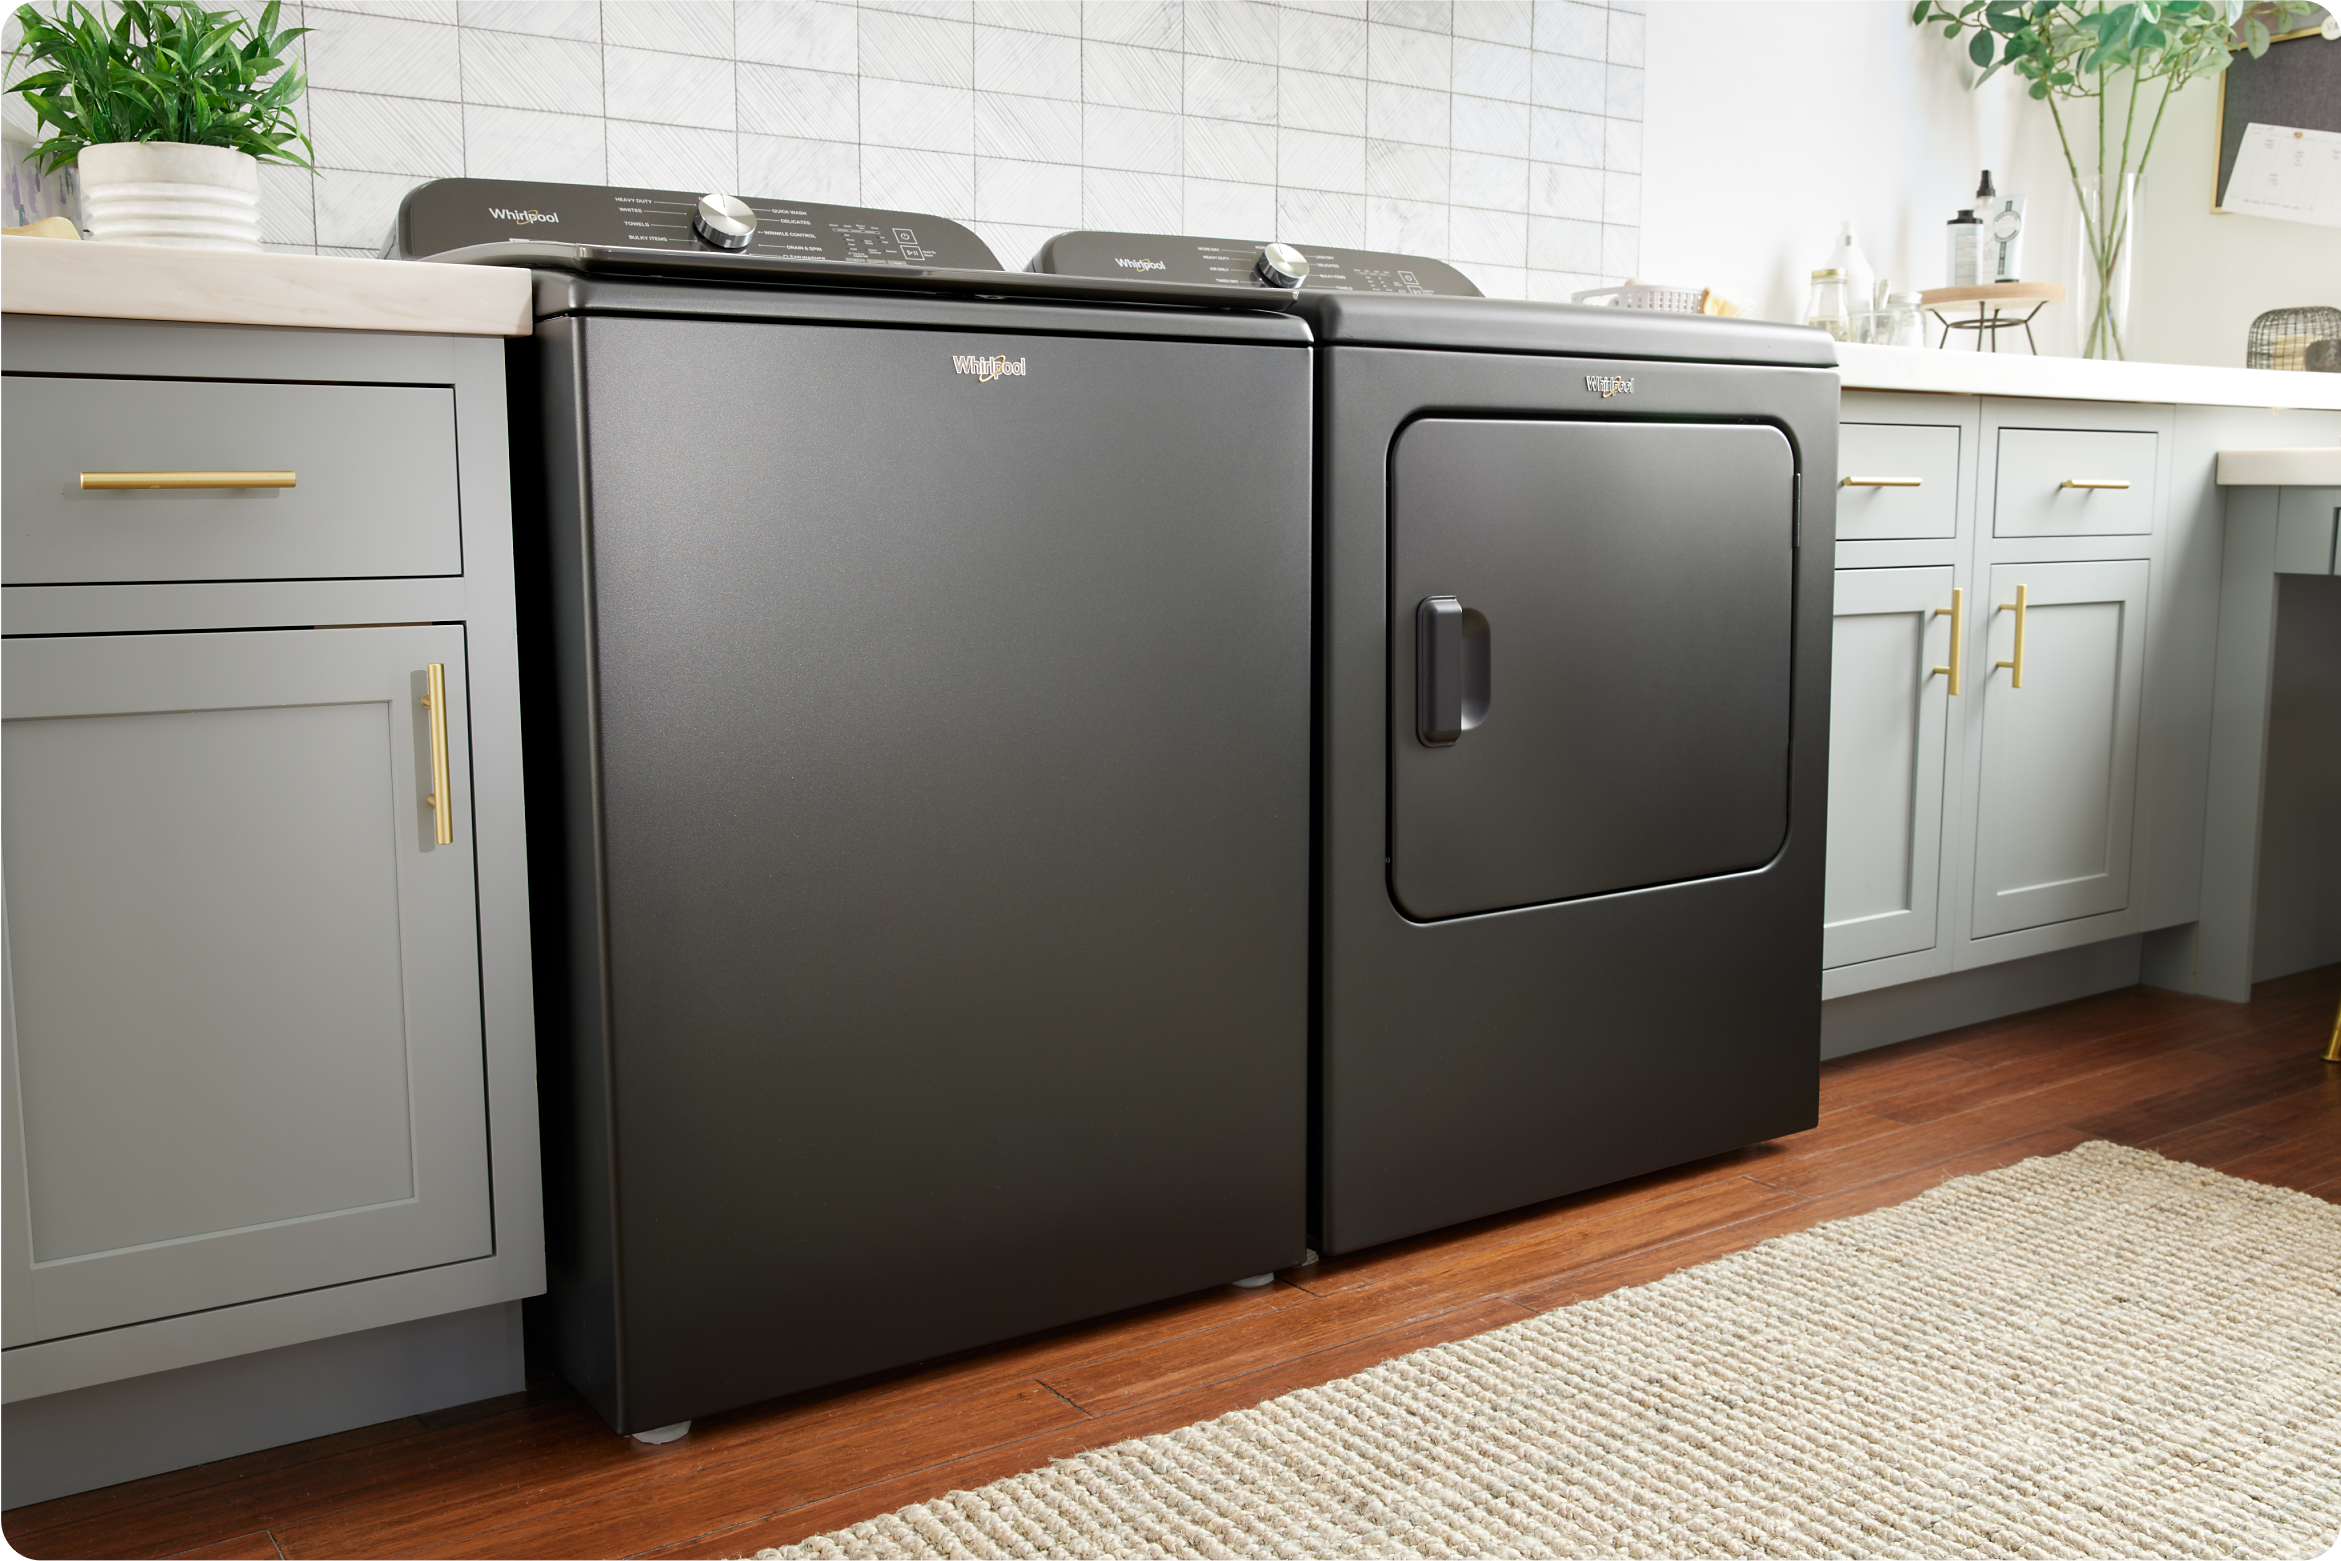 A Whirlpool® Top Load Washer & Dryer Set in laundry room with light cabinets